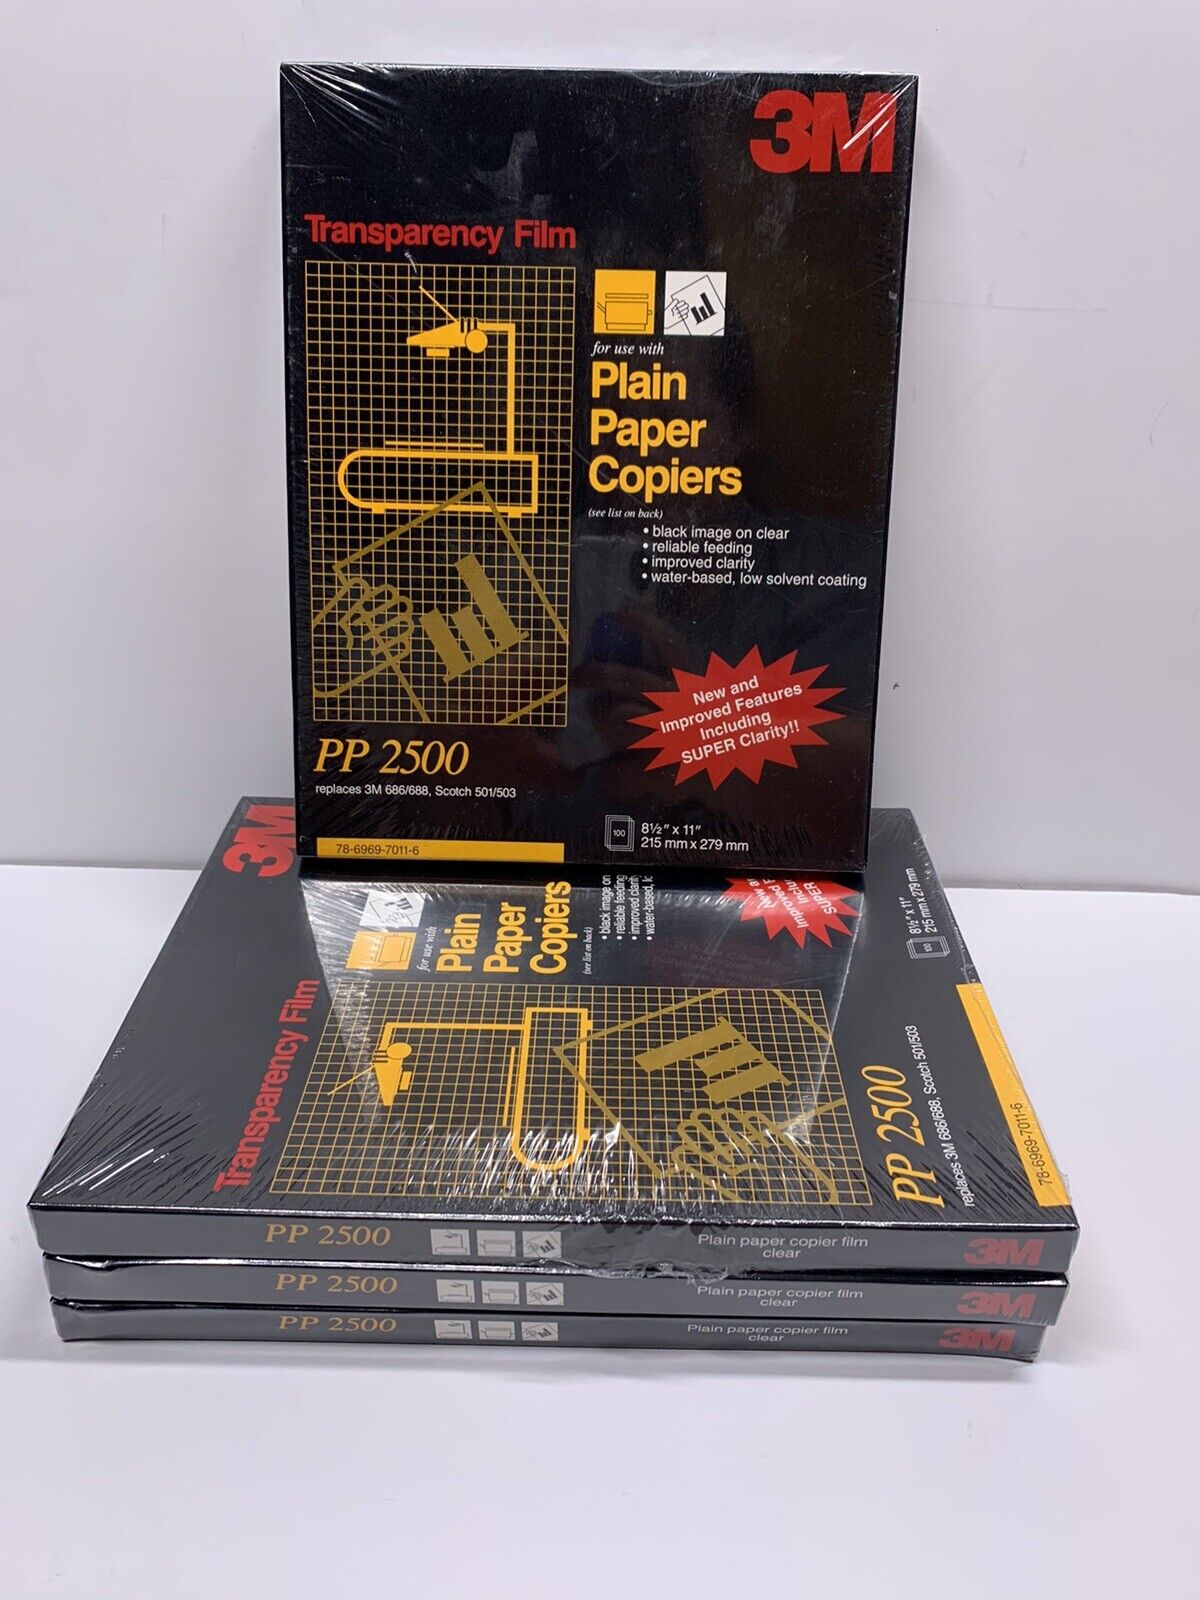 3m Transparency Film For Copiers 100 Sheets 8.5"x11" New Sealed Pp2500 4 Boxes